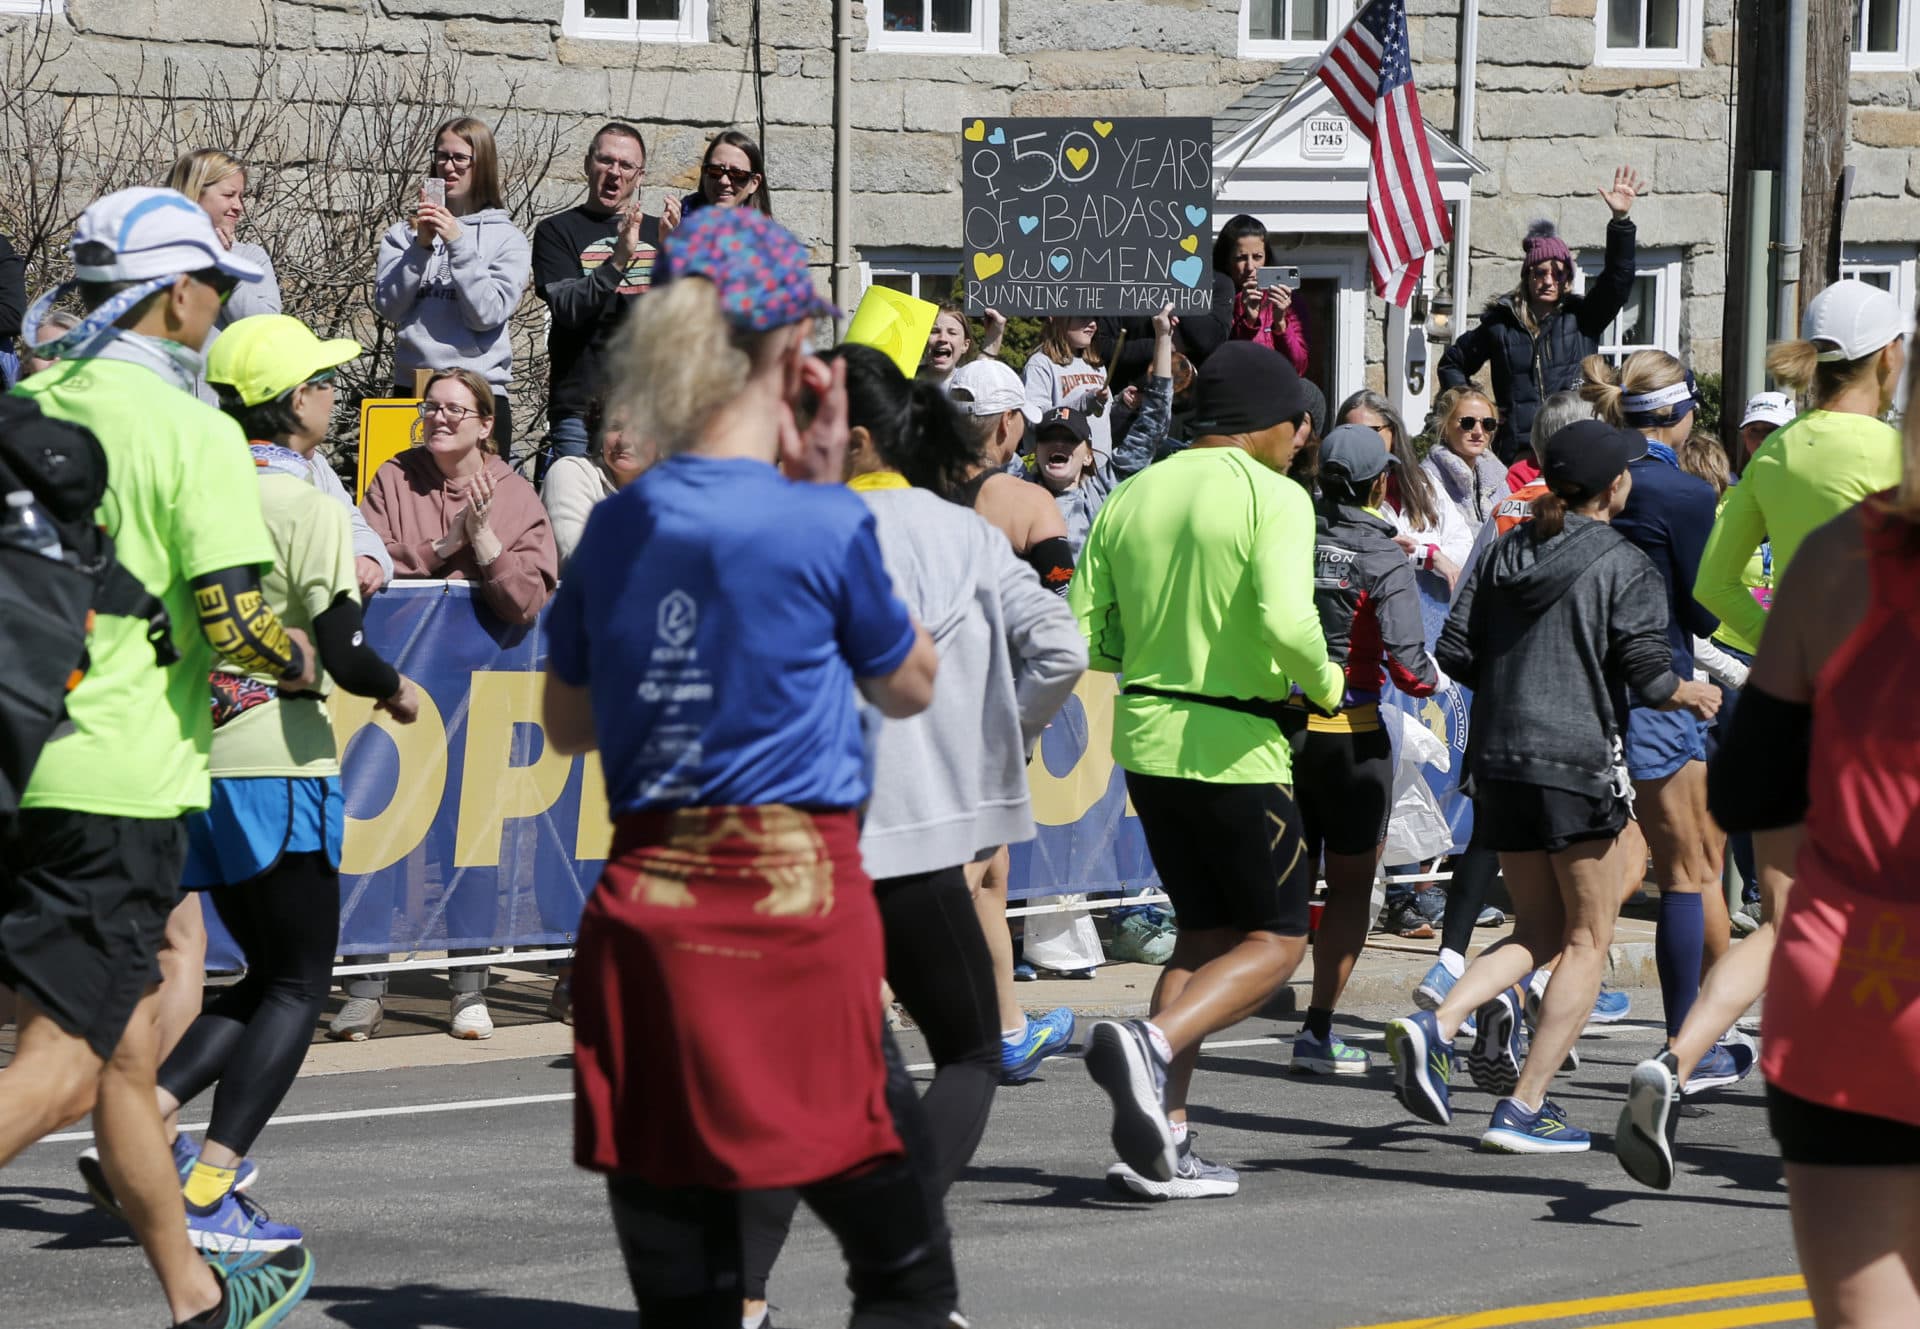 Runners in the 126th Boston Marathon pass a supporter holding a sign honoring the 50th anniversary of women's participation. (Mary Schwalm/AP)